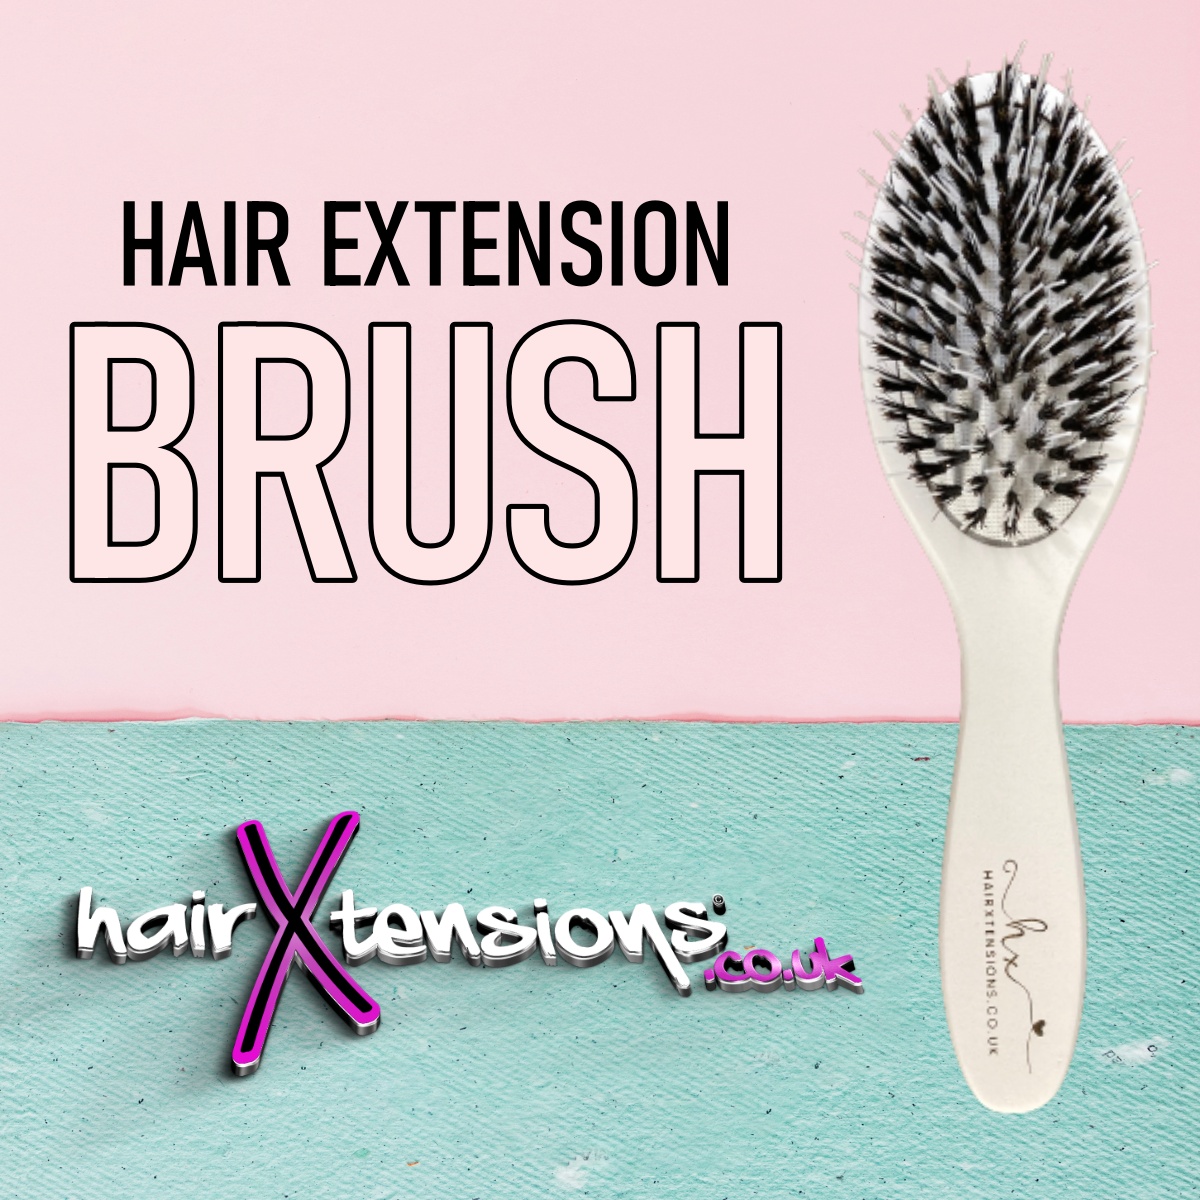 𝐇𝐚𝐢𝐫 𝐄𝐱𝐭𝐞𝐧𝐬𝐢𝐨𝐧 𝐒𝐨𝐟𝐭 𝐁𝐫𝐢𝐬𝐭𝐥𝐞 𝐁𝐫𝐮𝐬𝐡 ~ Our high-quality #hairextensionhairbrush is suitable for all hair types and popular with #hairextension users as it minimizes snagging and prevents frizz.

🛒 hairxtensions.co.uk/collections/br…